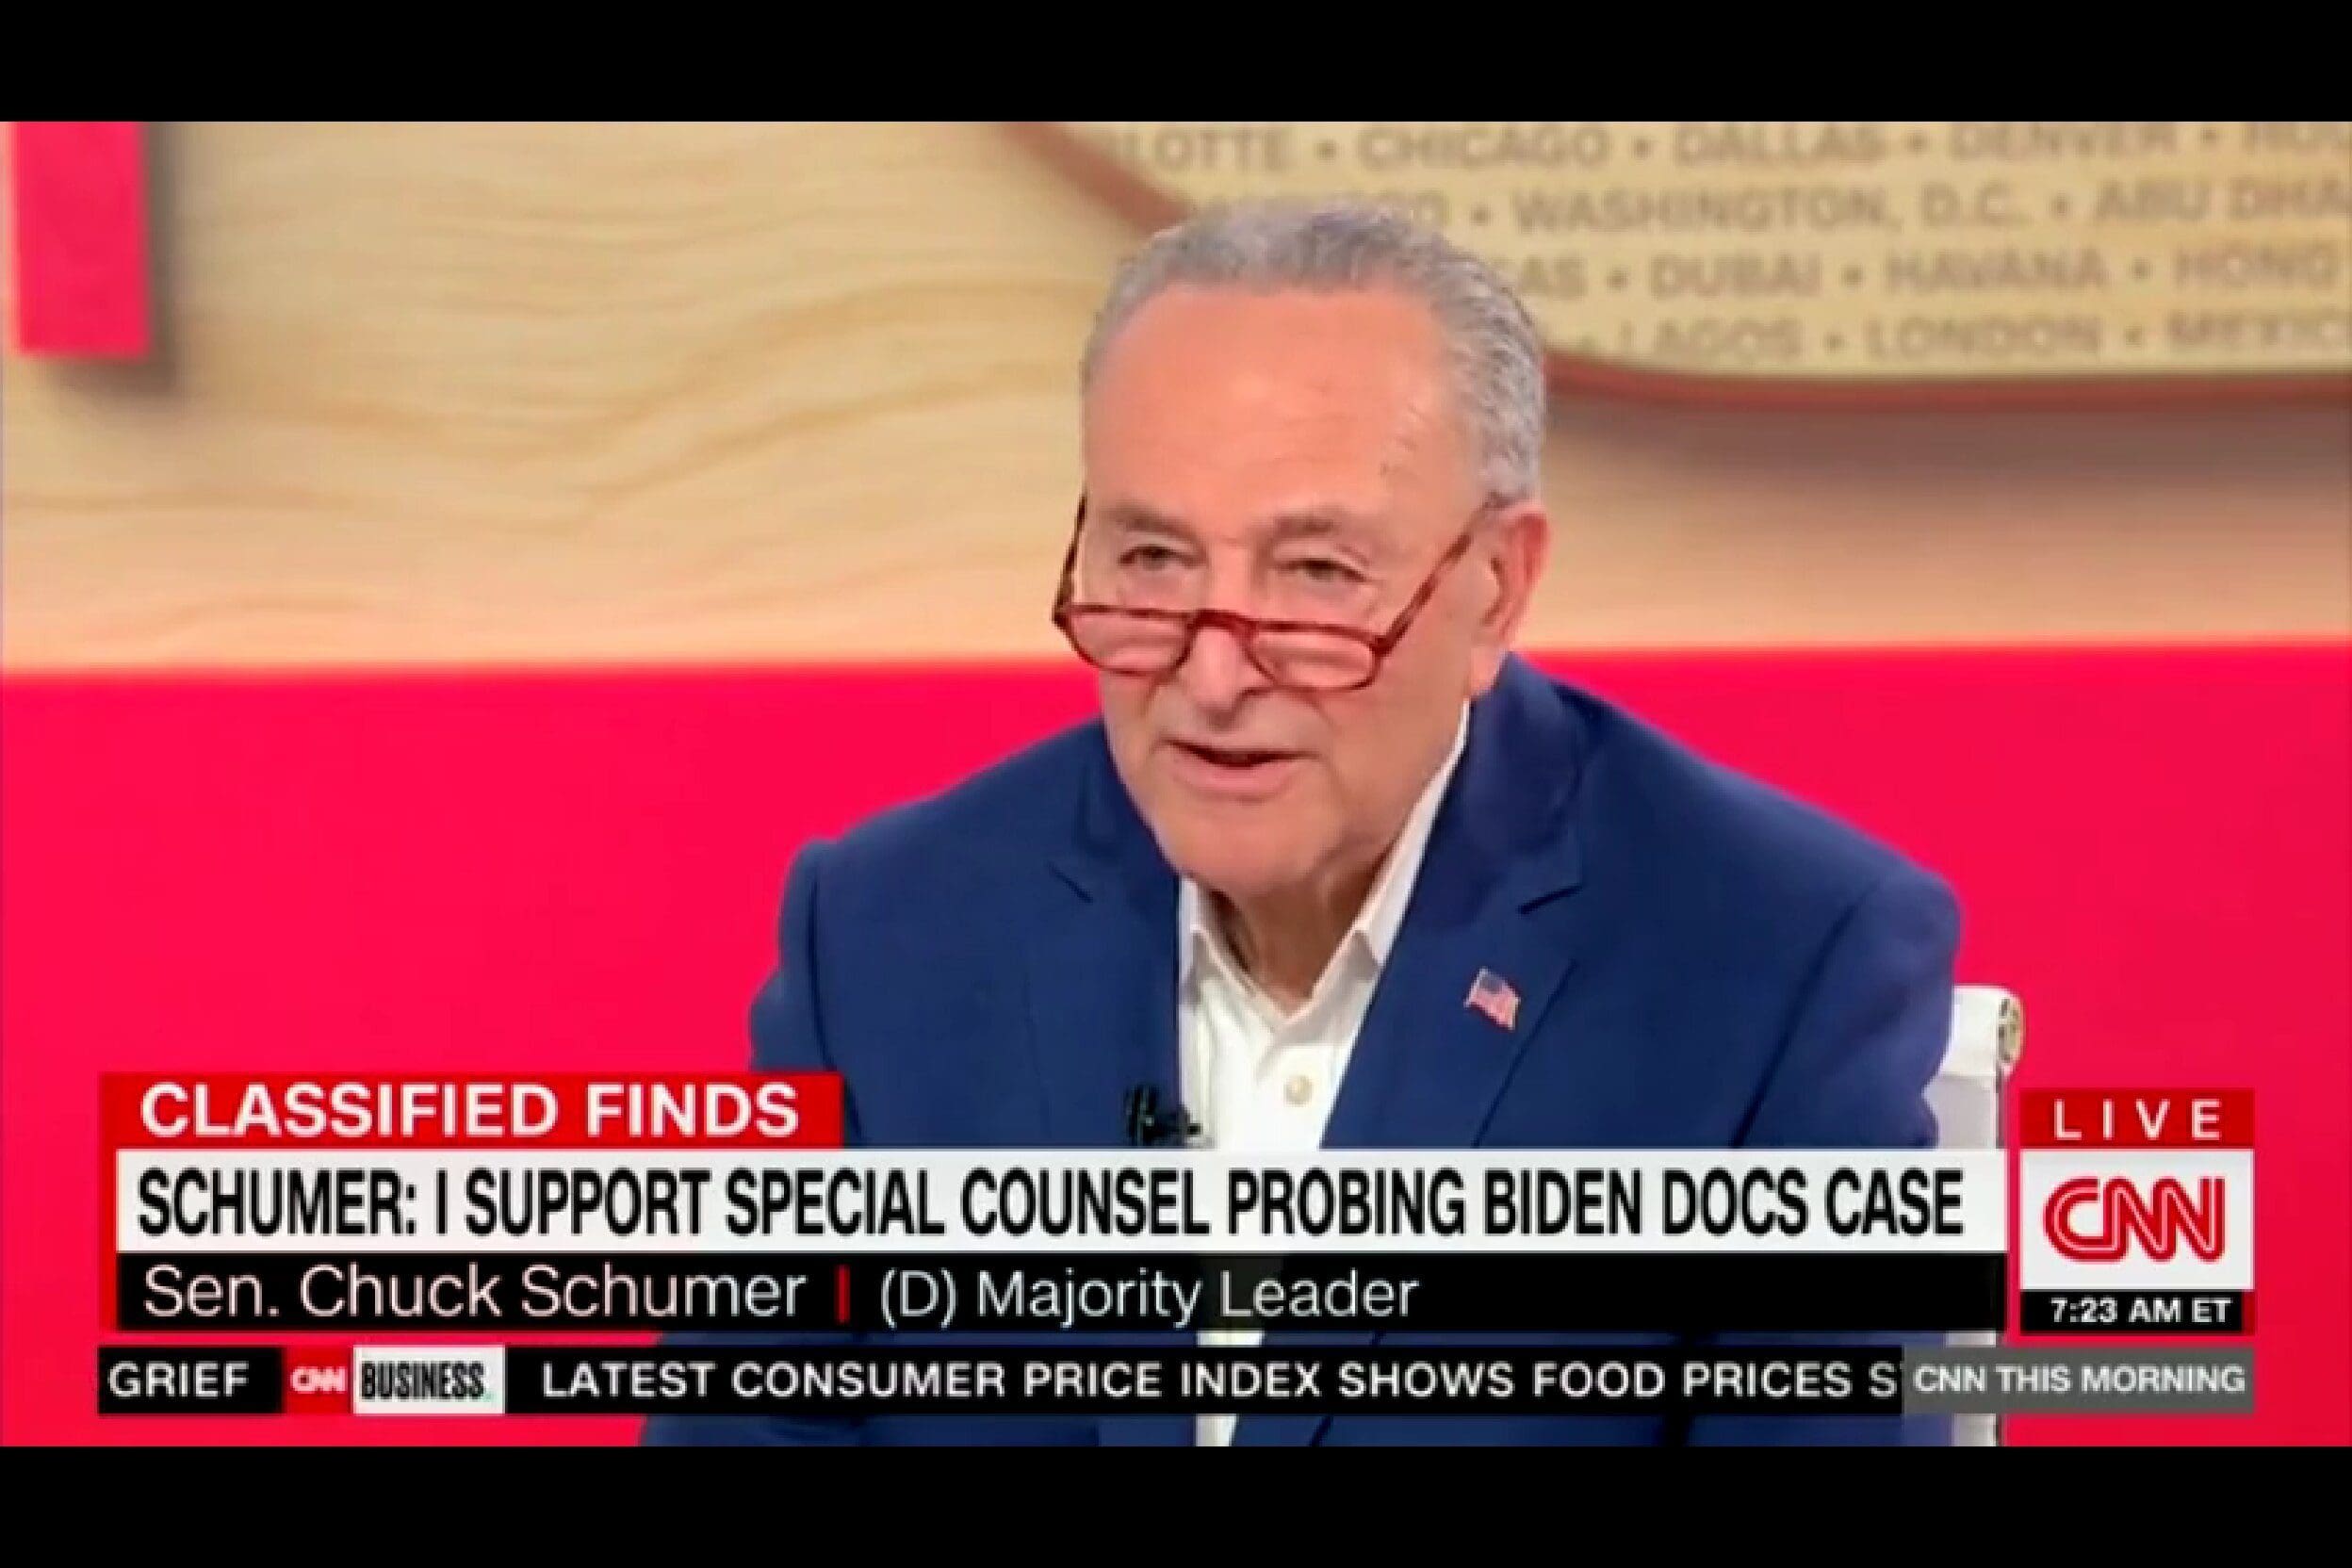 chuck-schumer-loses-it-on-cnn-after-being-pressed-on-biden’s-classified-documents-scandal-(video)